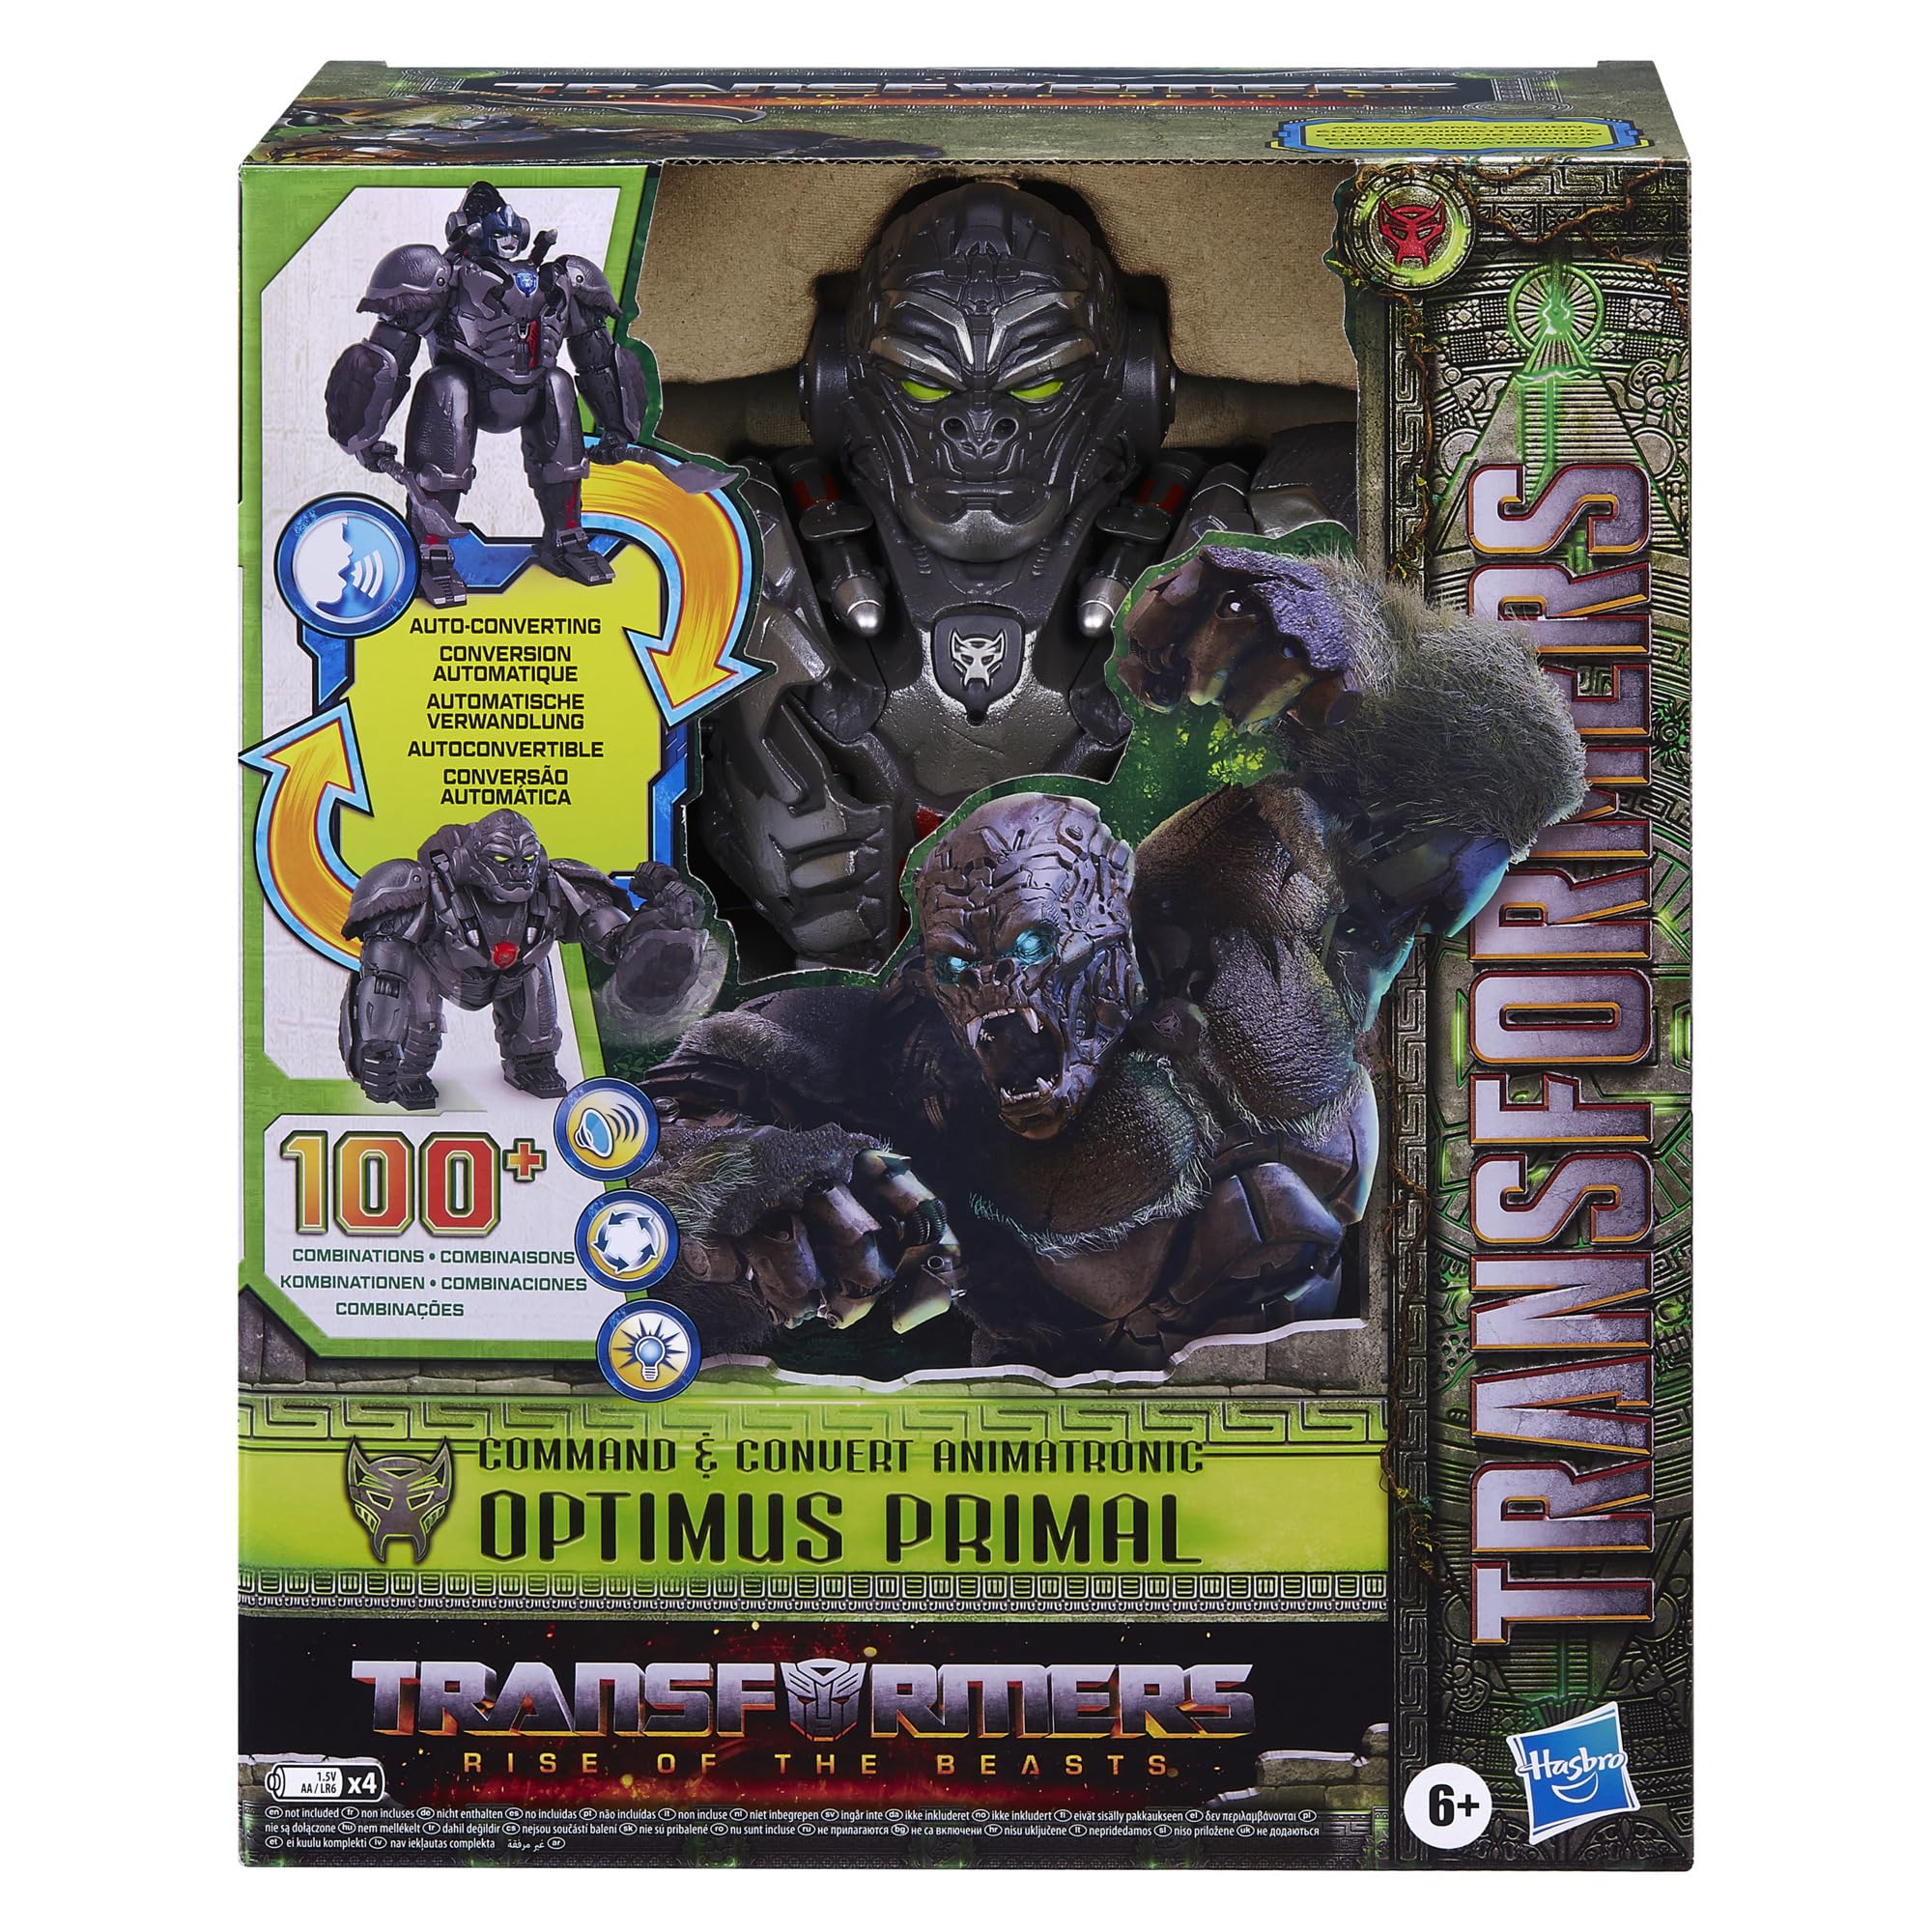 Transformers Toys Rise of The Beasts Command & Convert Animatronic Optimus Primal Toy, 12.5-Inch, Toys for Boys and Girls Ages 6 and Up